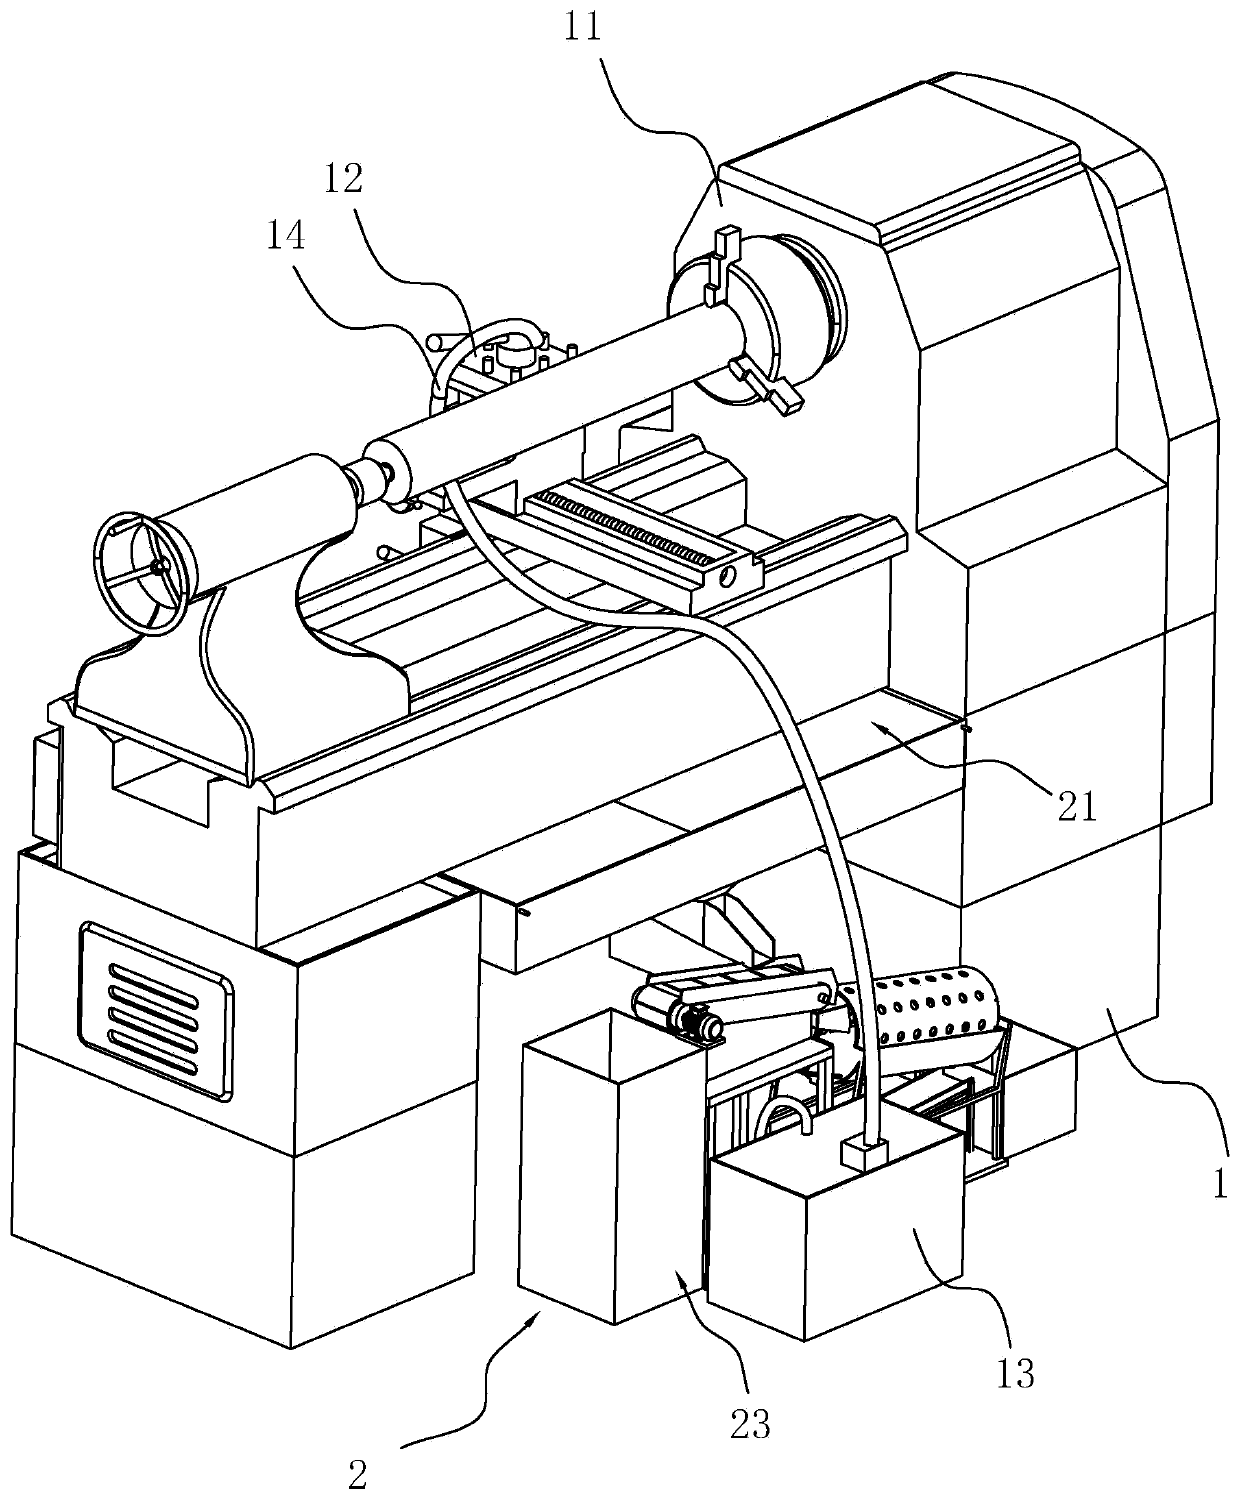 Lathe with coolant recovery device